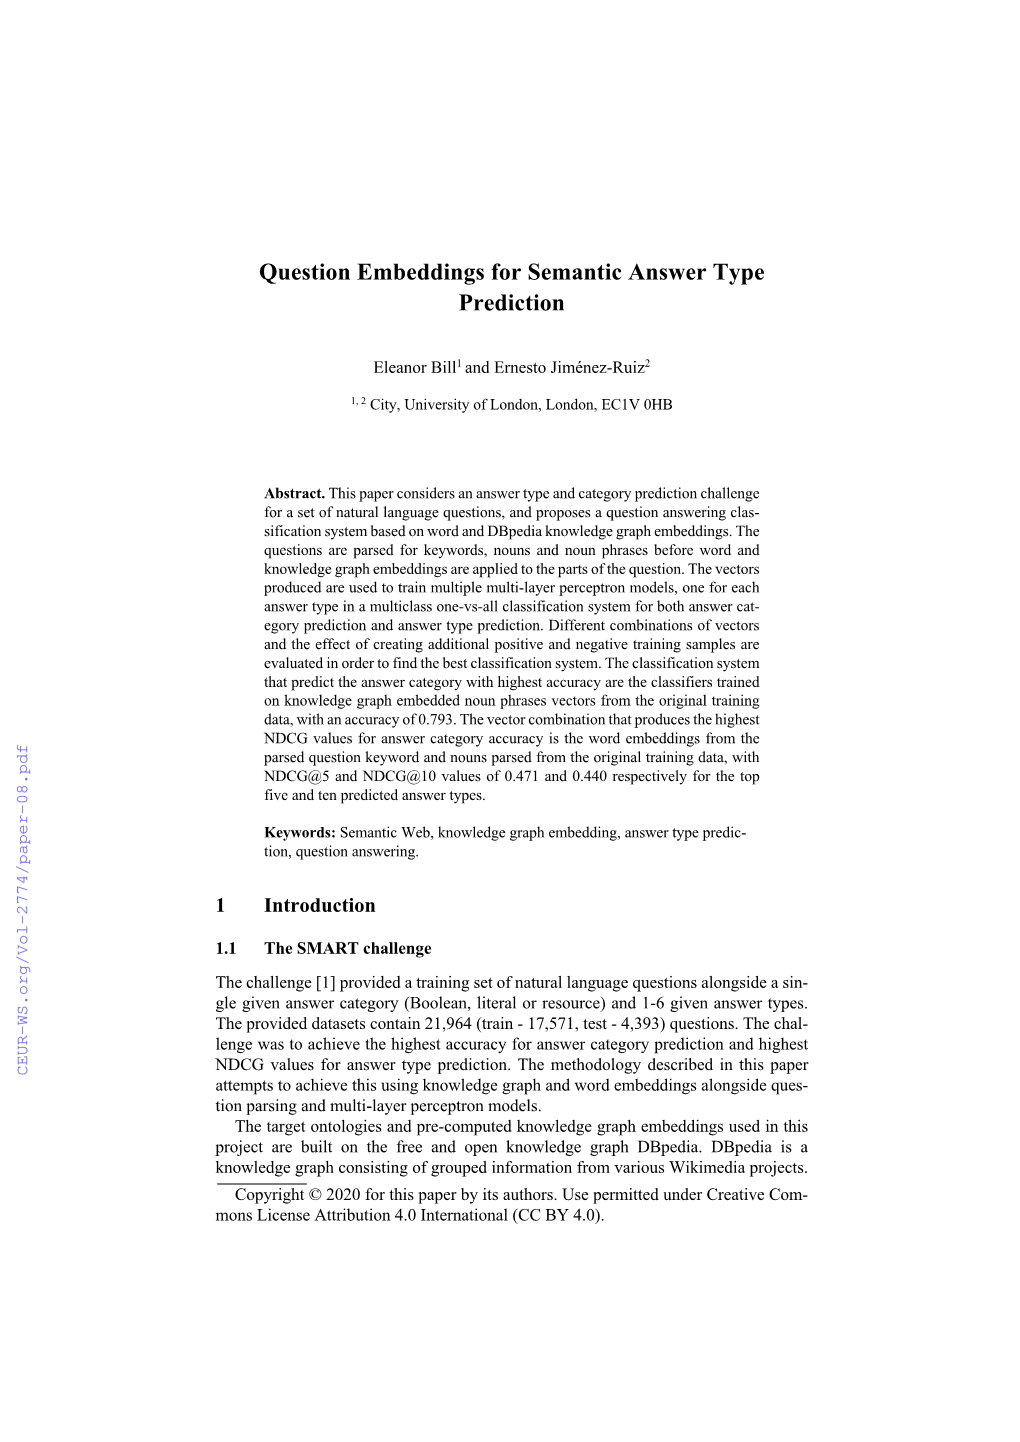 Question Embeddings for Semantic Answer Type Prediction